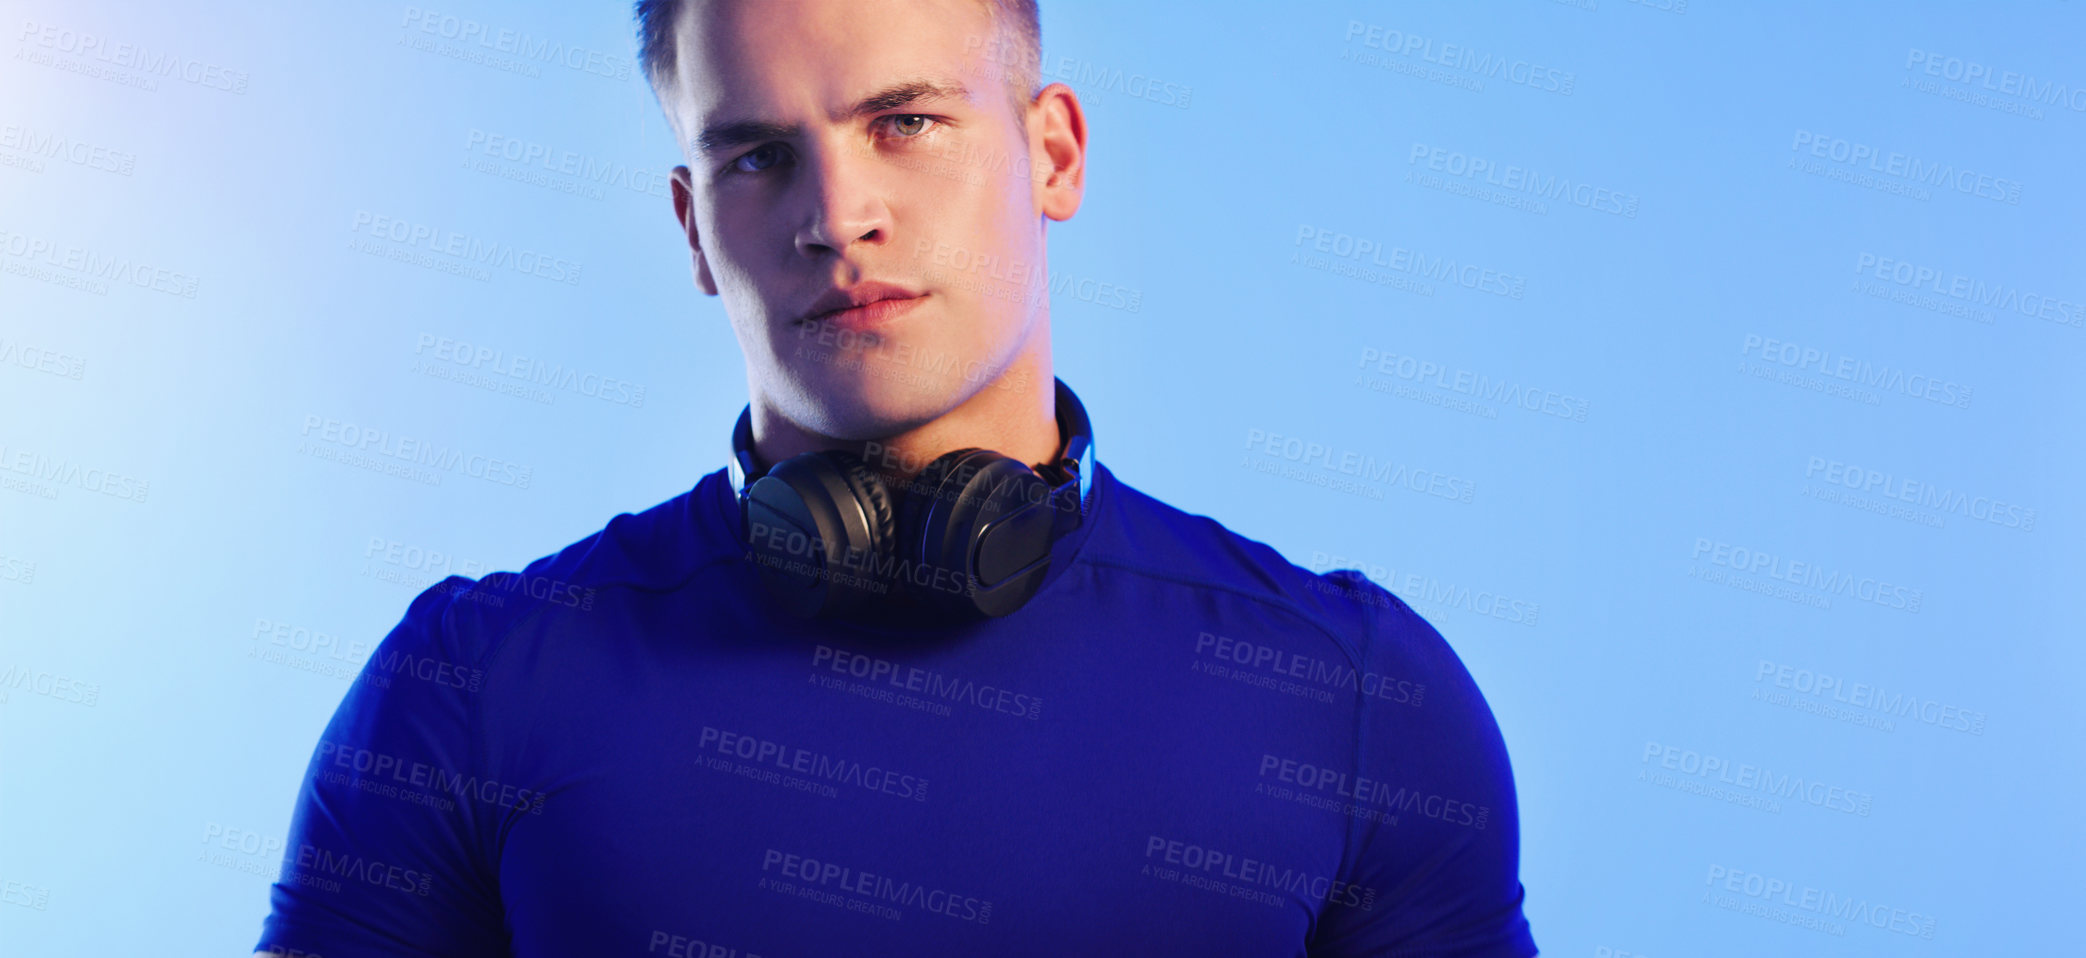 Buy stock photo Studio portrait of a young man posing with headphones around his neck against a blue background